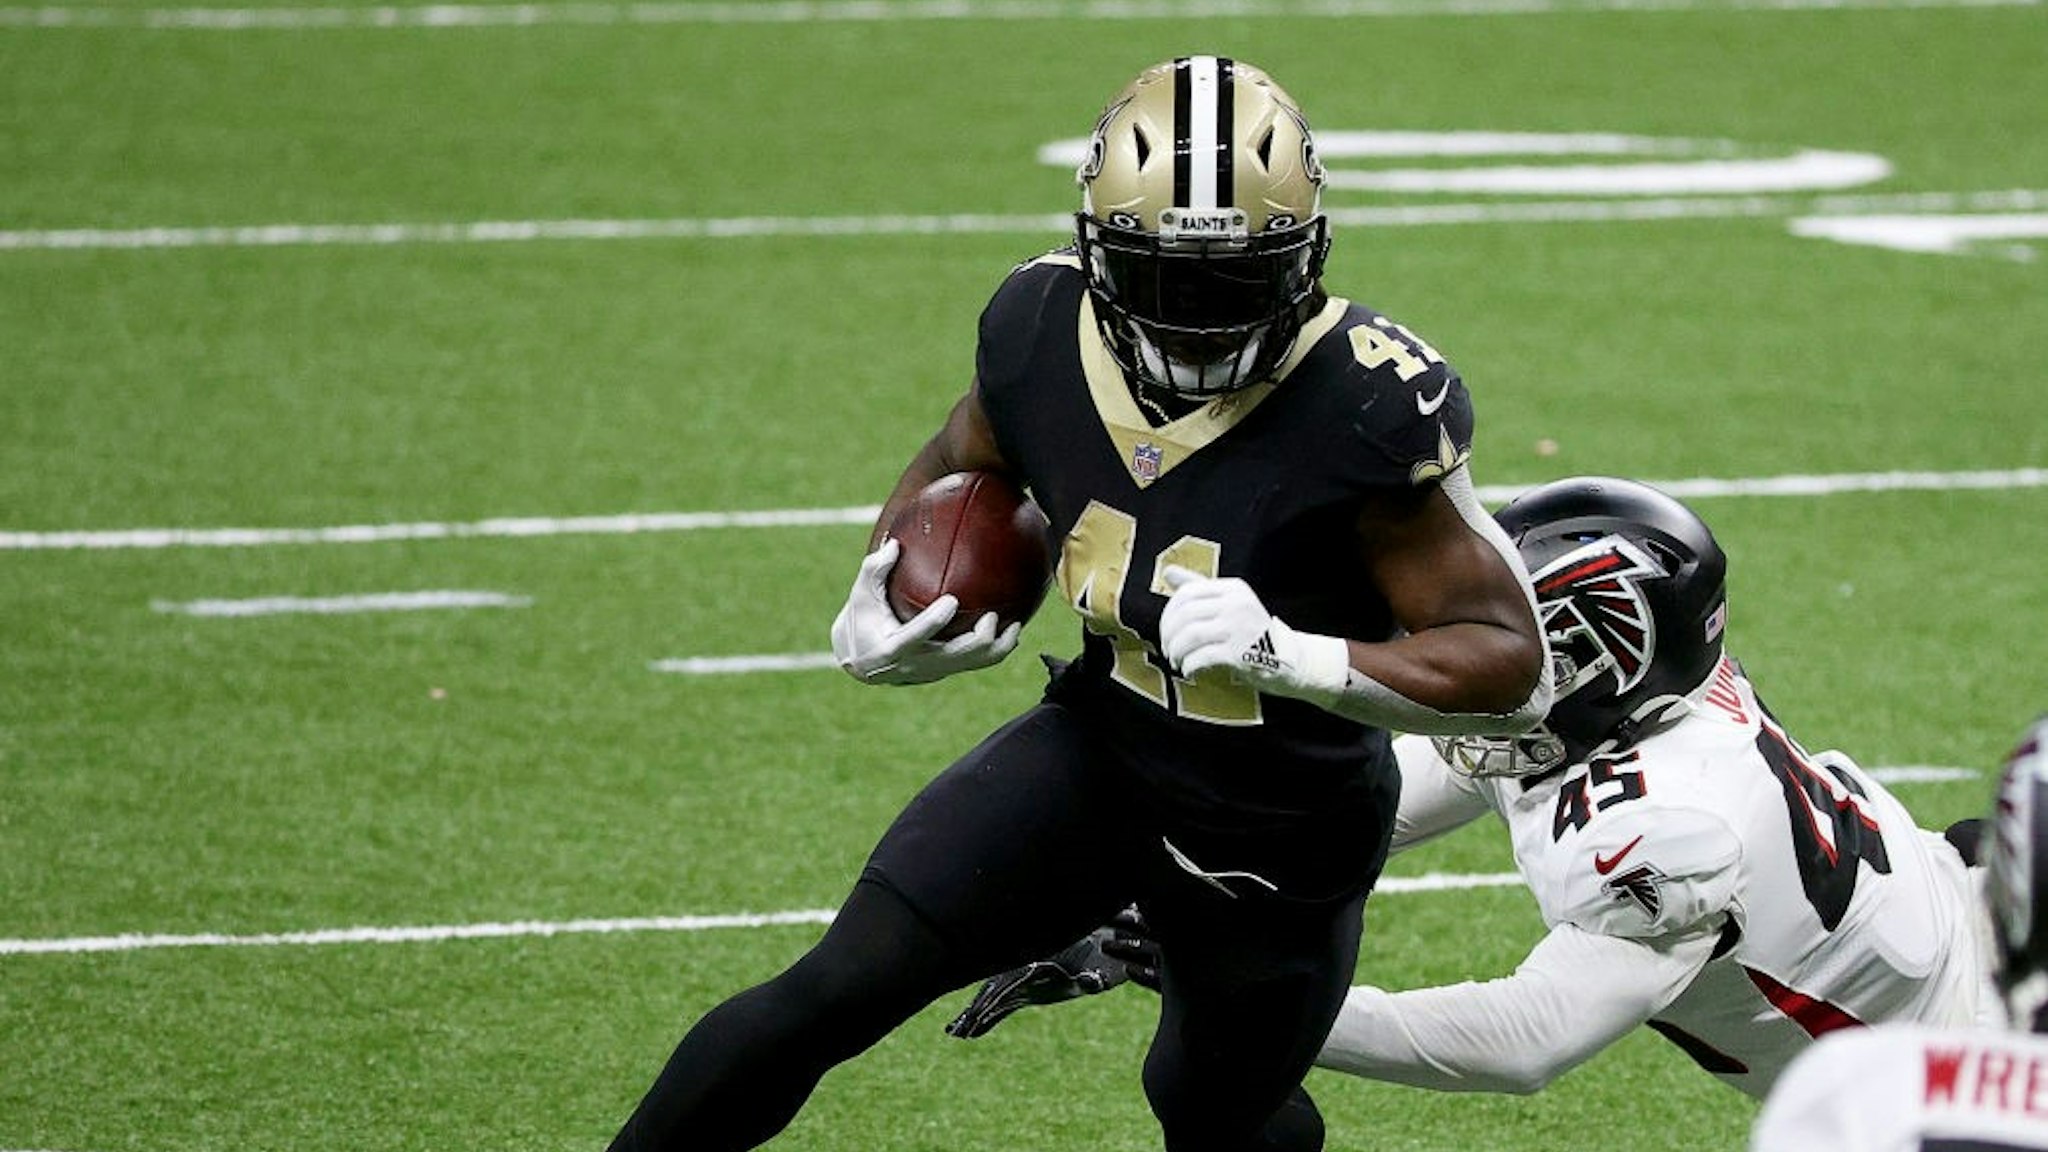 NEW ORLEANS, LOUISIANA - NOVEMBER 22: Alvin Kamara #41 of the New Orleans Saints carries the ball in for a touchdown as Deion Jones #45 of the Atlanta Falcons fails to make the tackle in the second quarter at Mercedes-Benz Superdome on November 22, 2020 in New Orleans, Louisiana. (Photo by